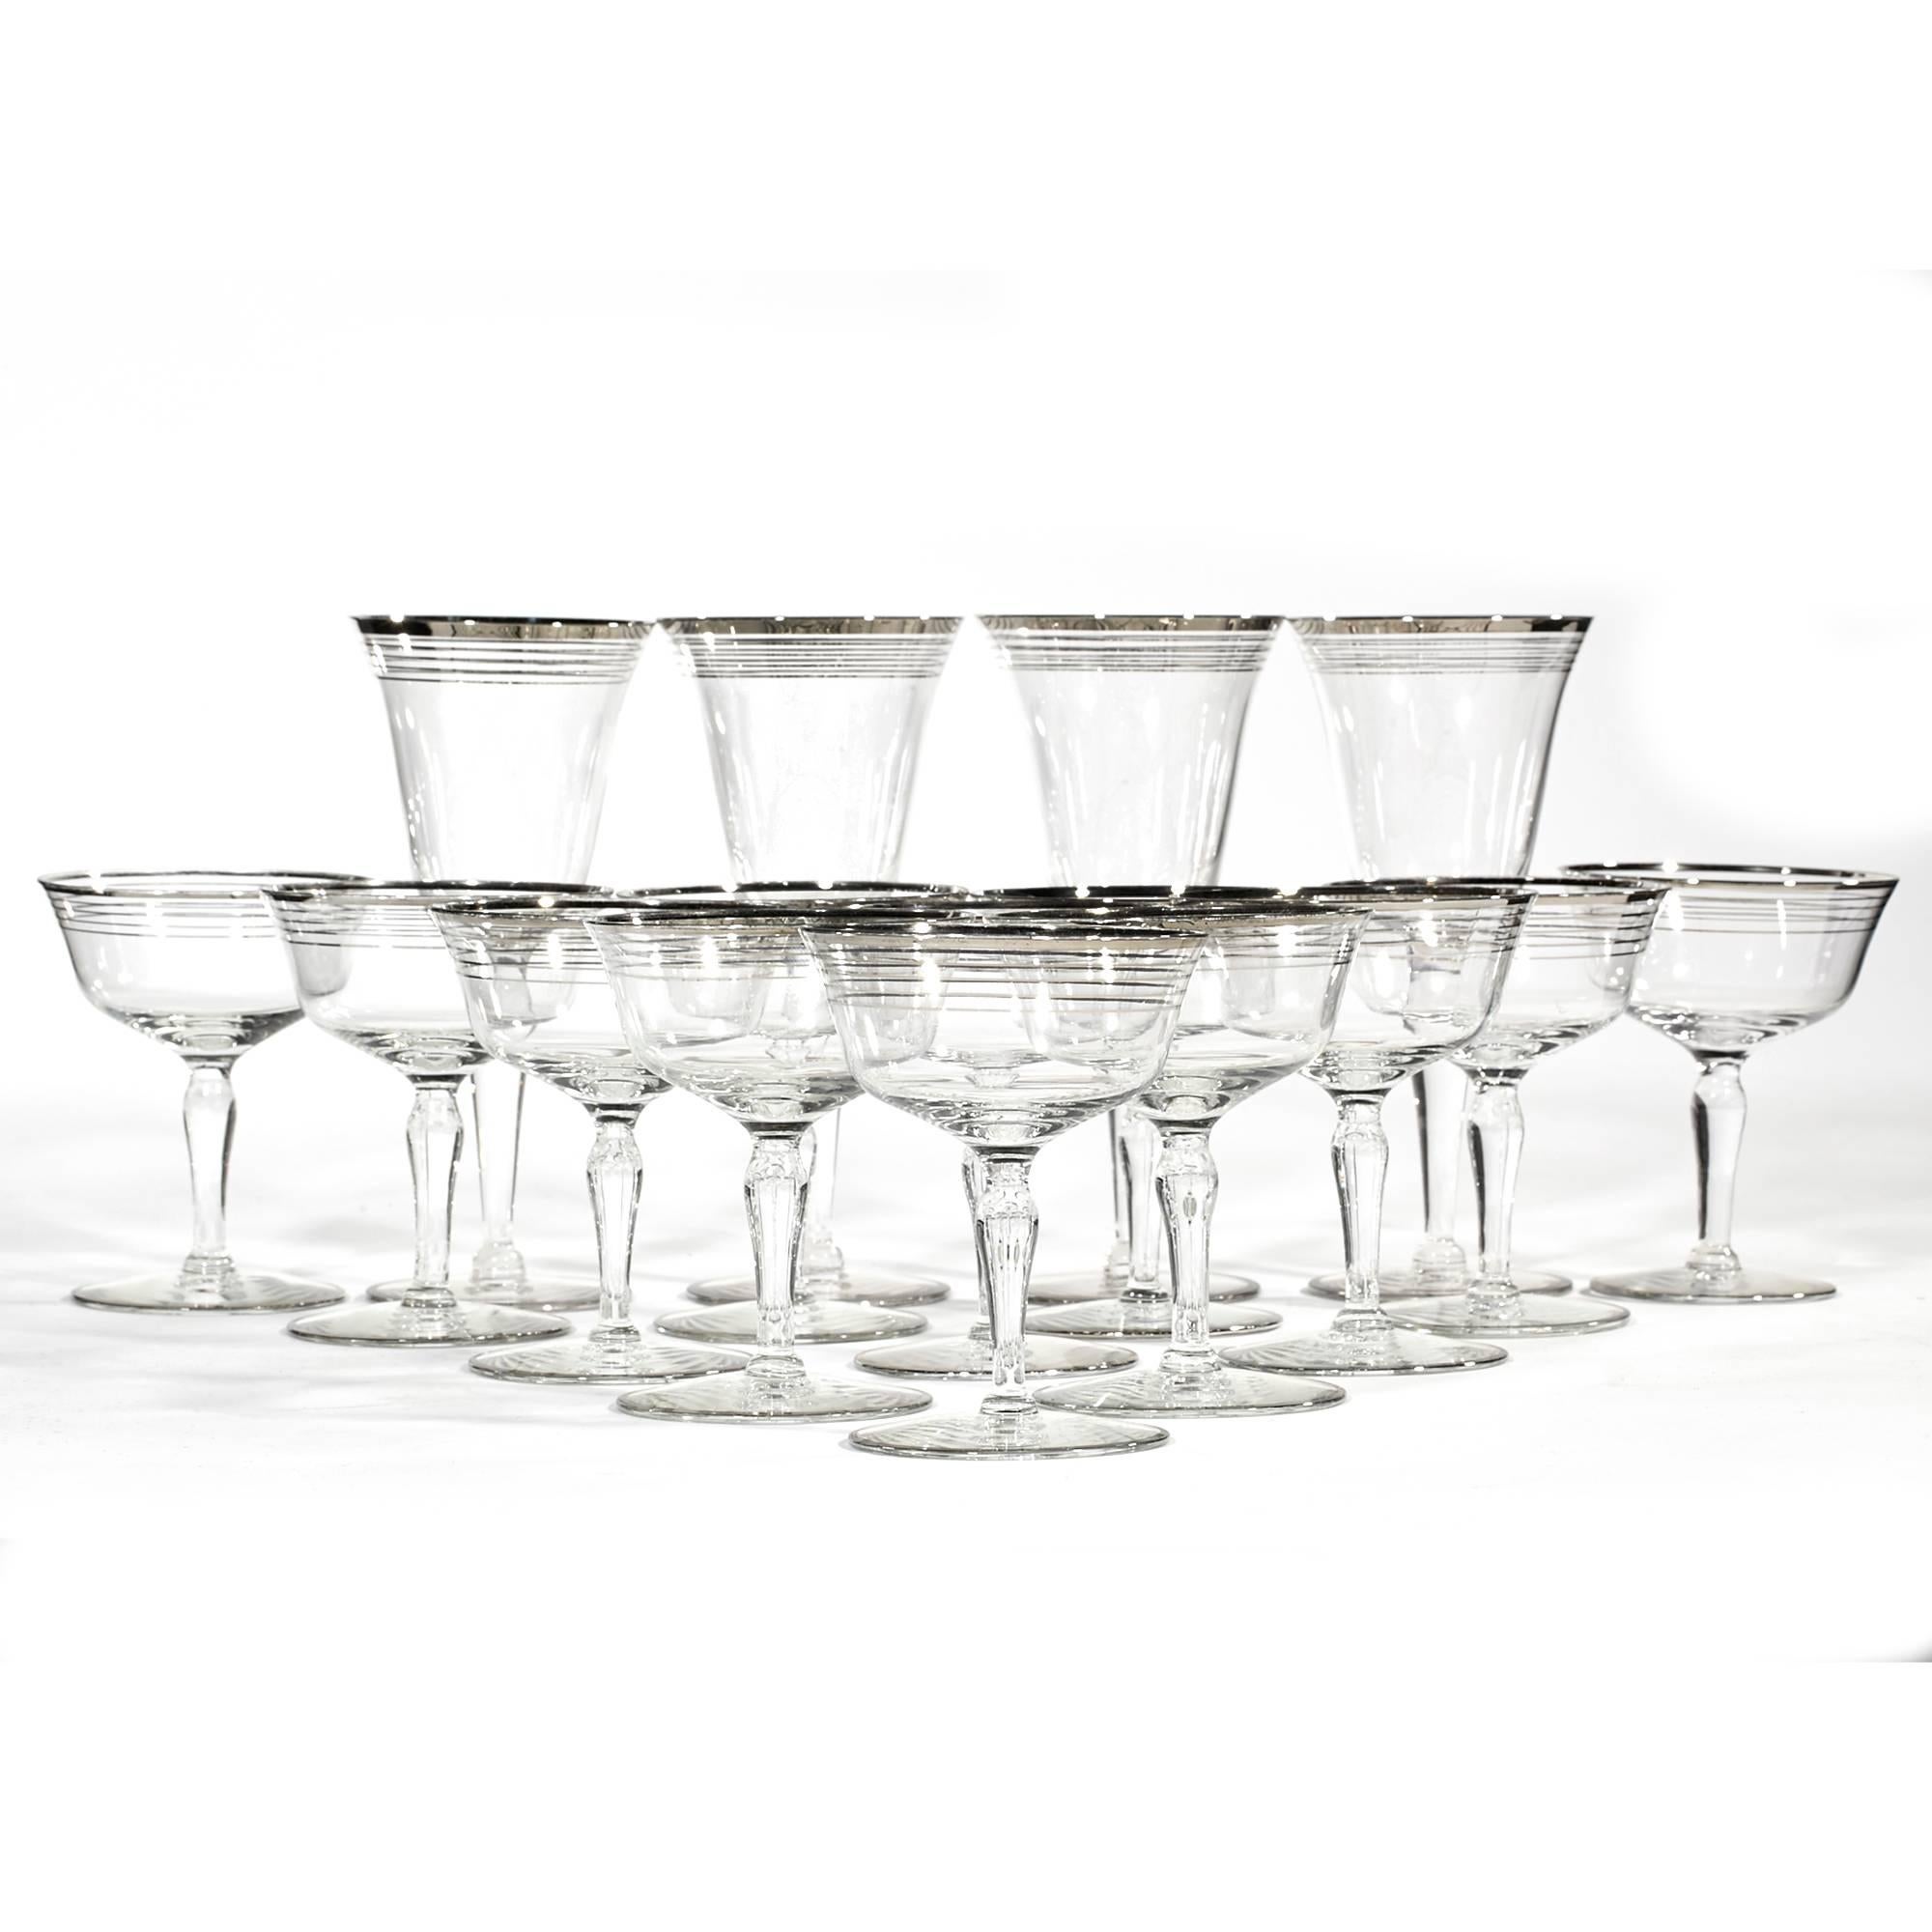 Vintage Art Deco set of 15 silver ring glass stems, circa 1930s.
4-tall wines measures: 3.5in.D x 7.5in.H
11-coupe stems 3.75in.D x 4.75in.H.